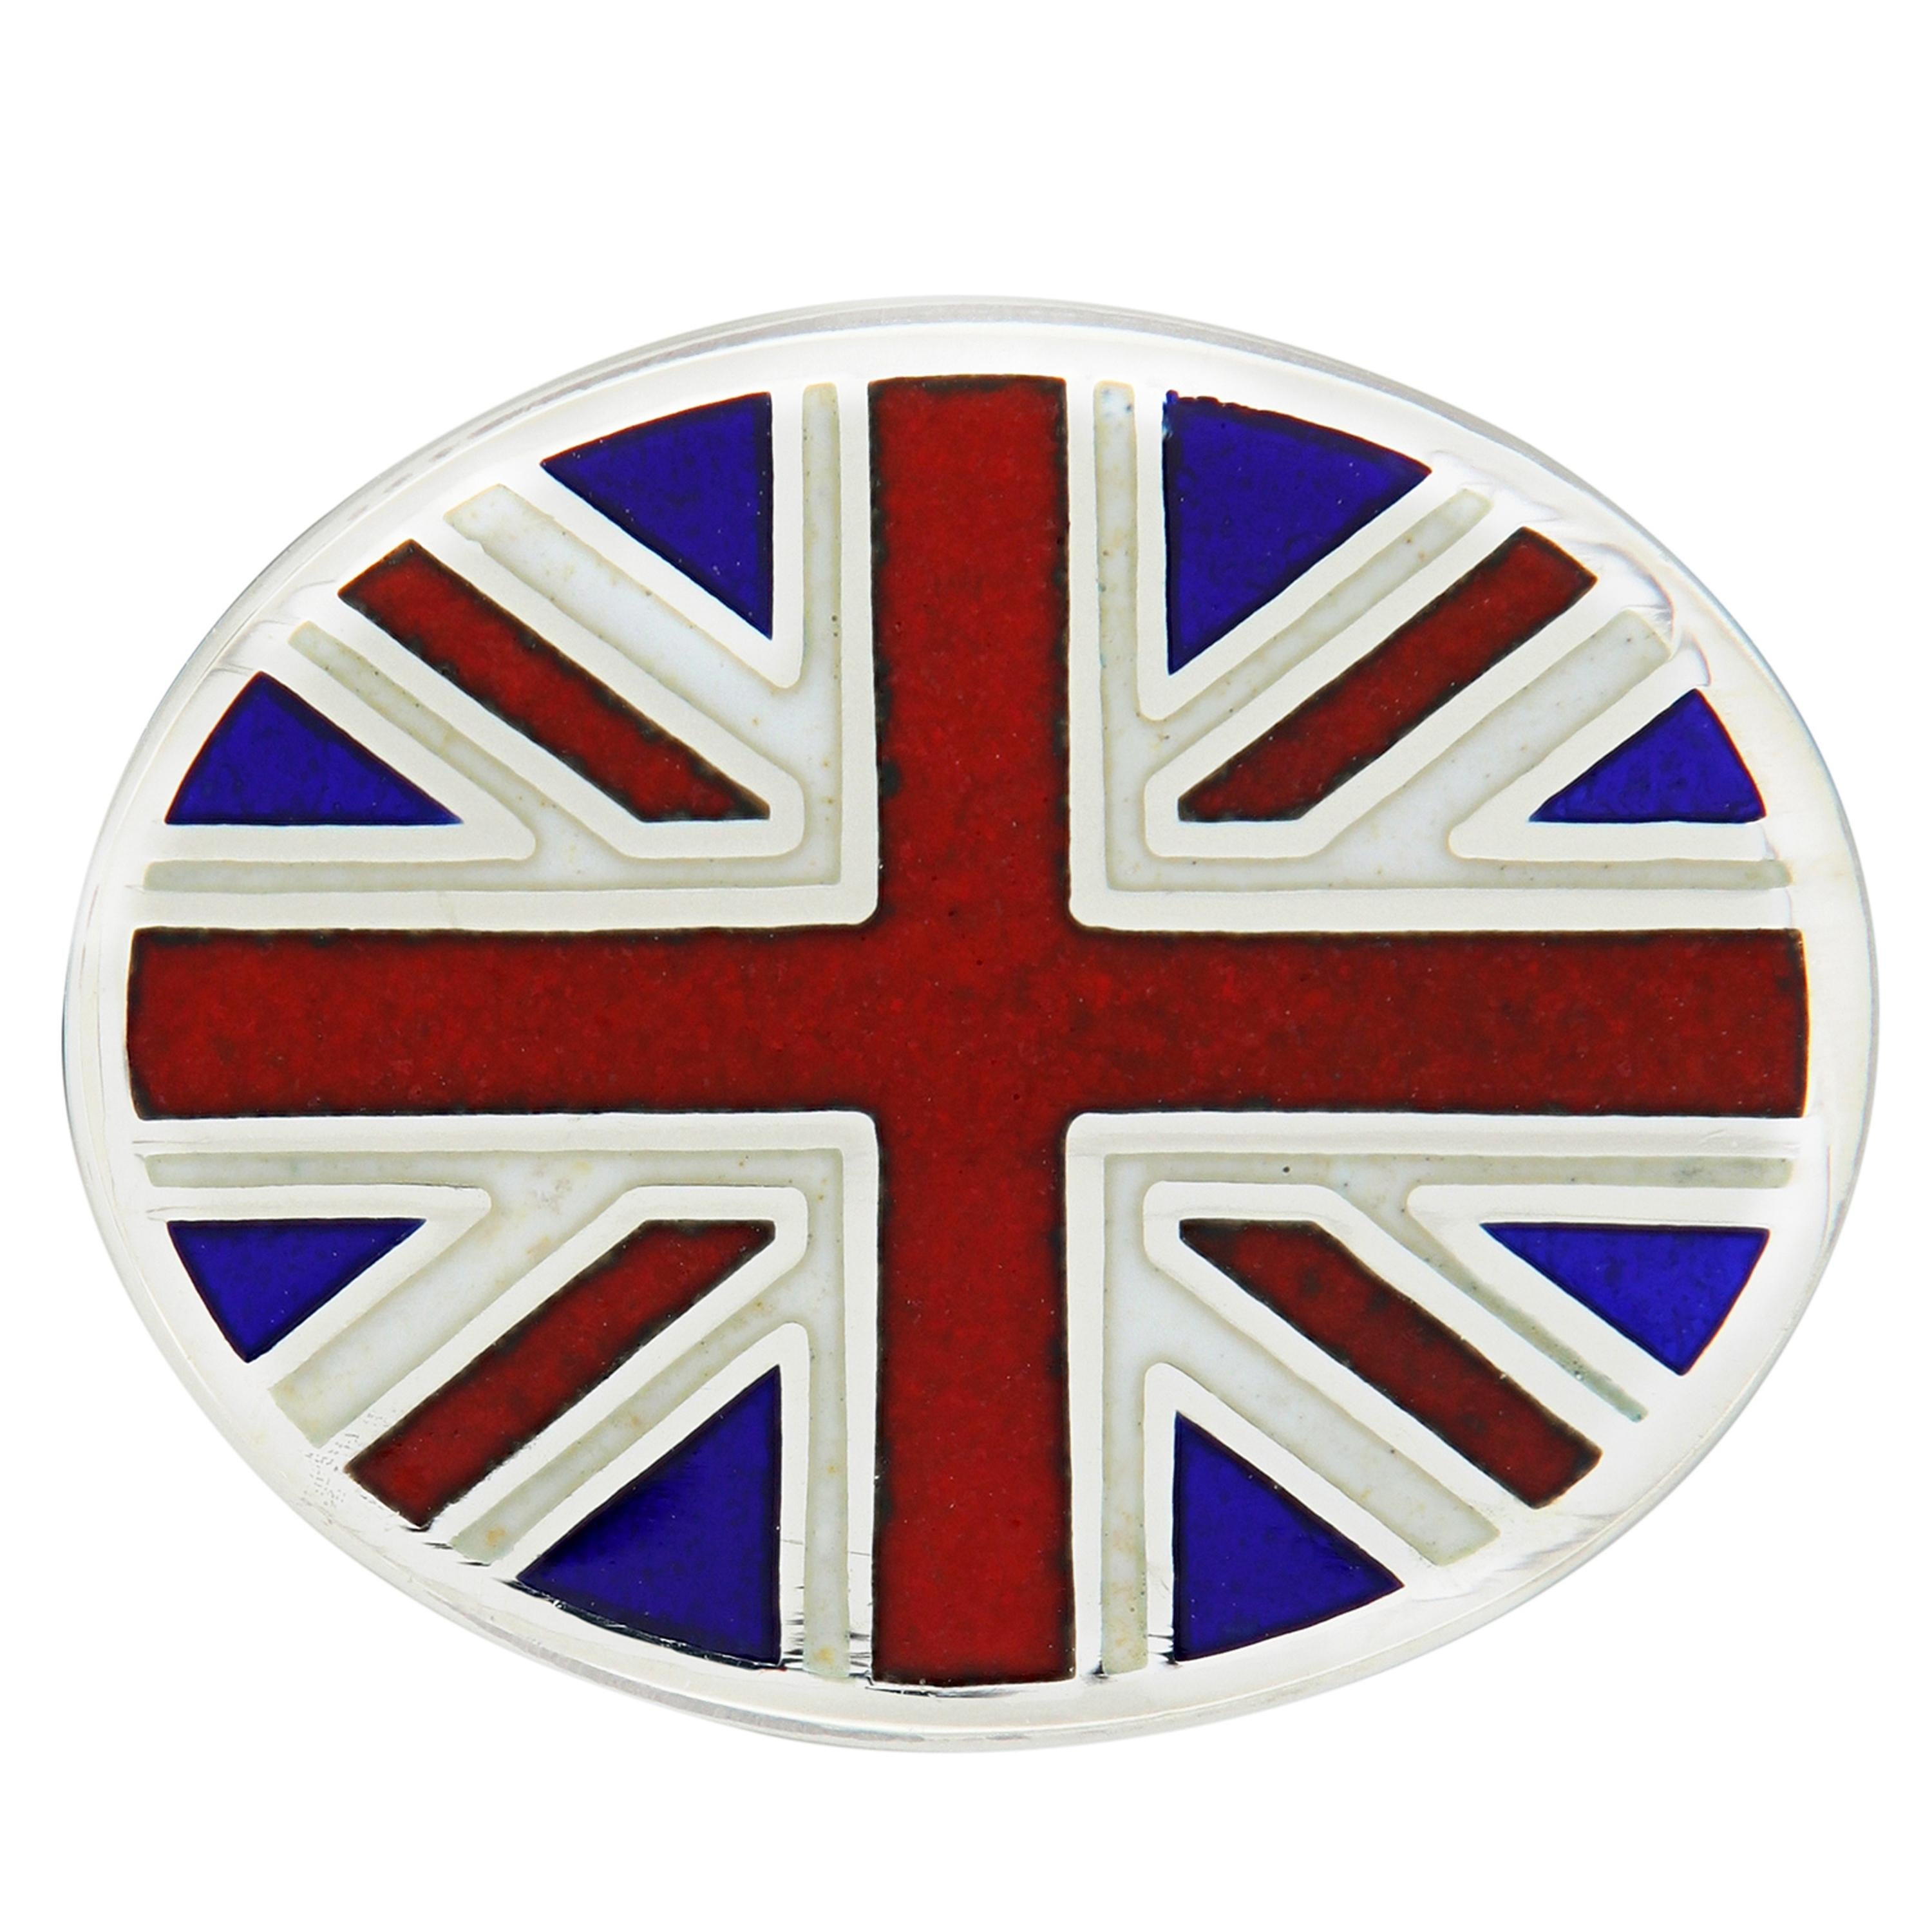 Beautiful Guilloche enamel Union Jack design cufflinks. Handmade in England for 
Campanelli & Pear. Weighs 12.6 grams. Oval measures 14mm x 19mm.